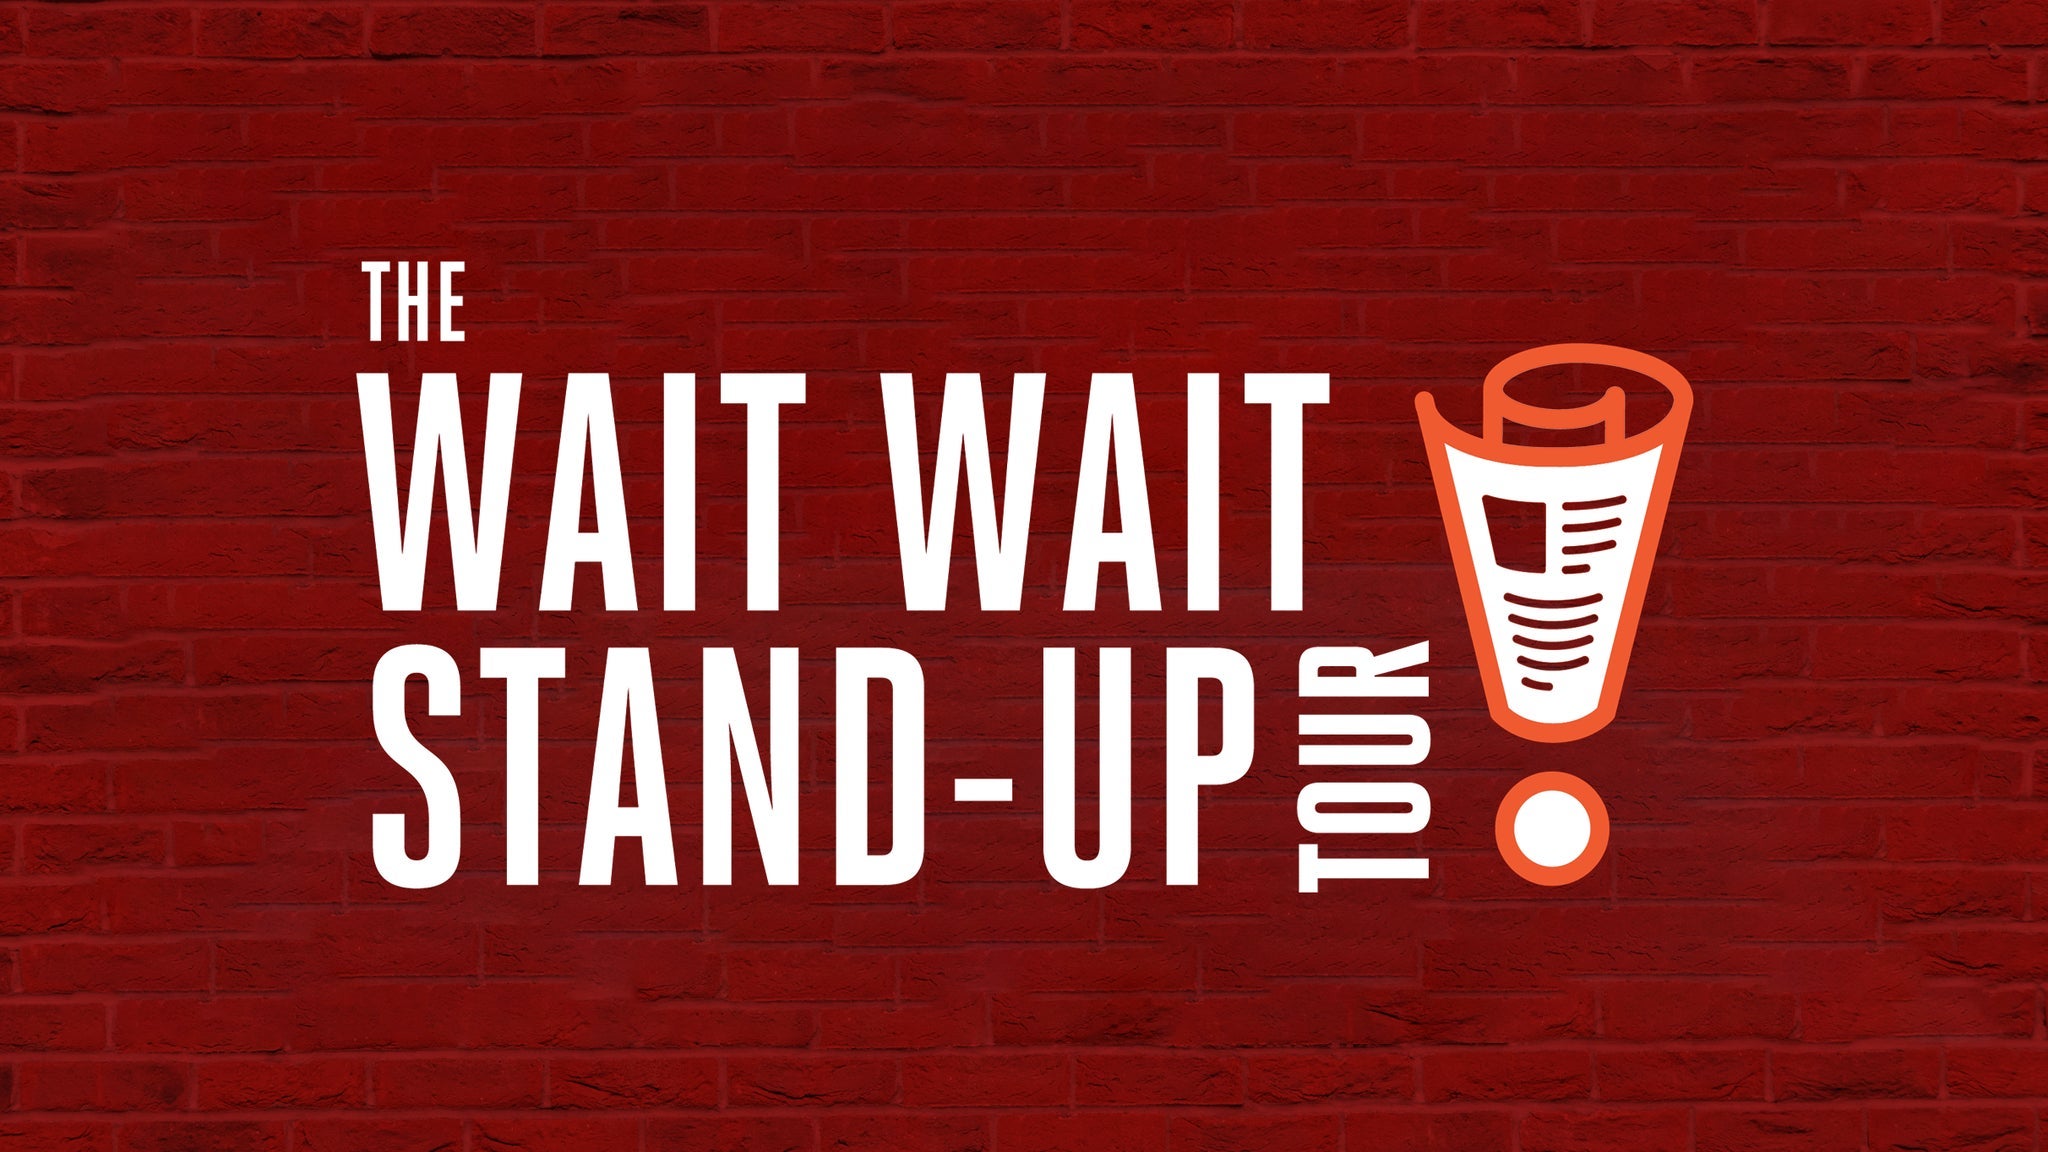 updated presale password to The Wait Wait Stand-Up Tour face value tickets in Charleston at The Charleston Music Hall